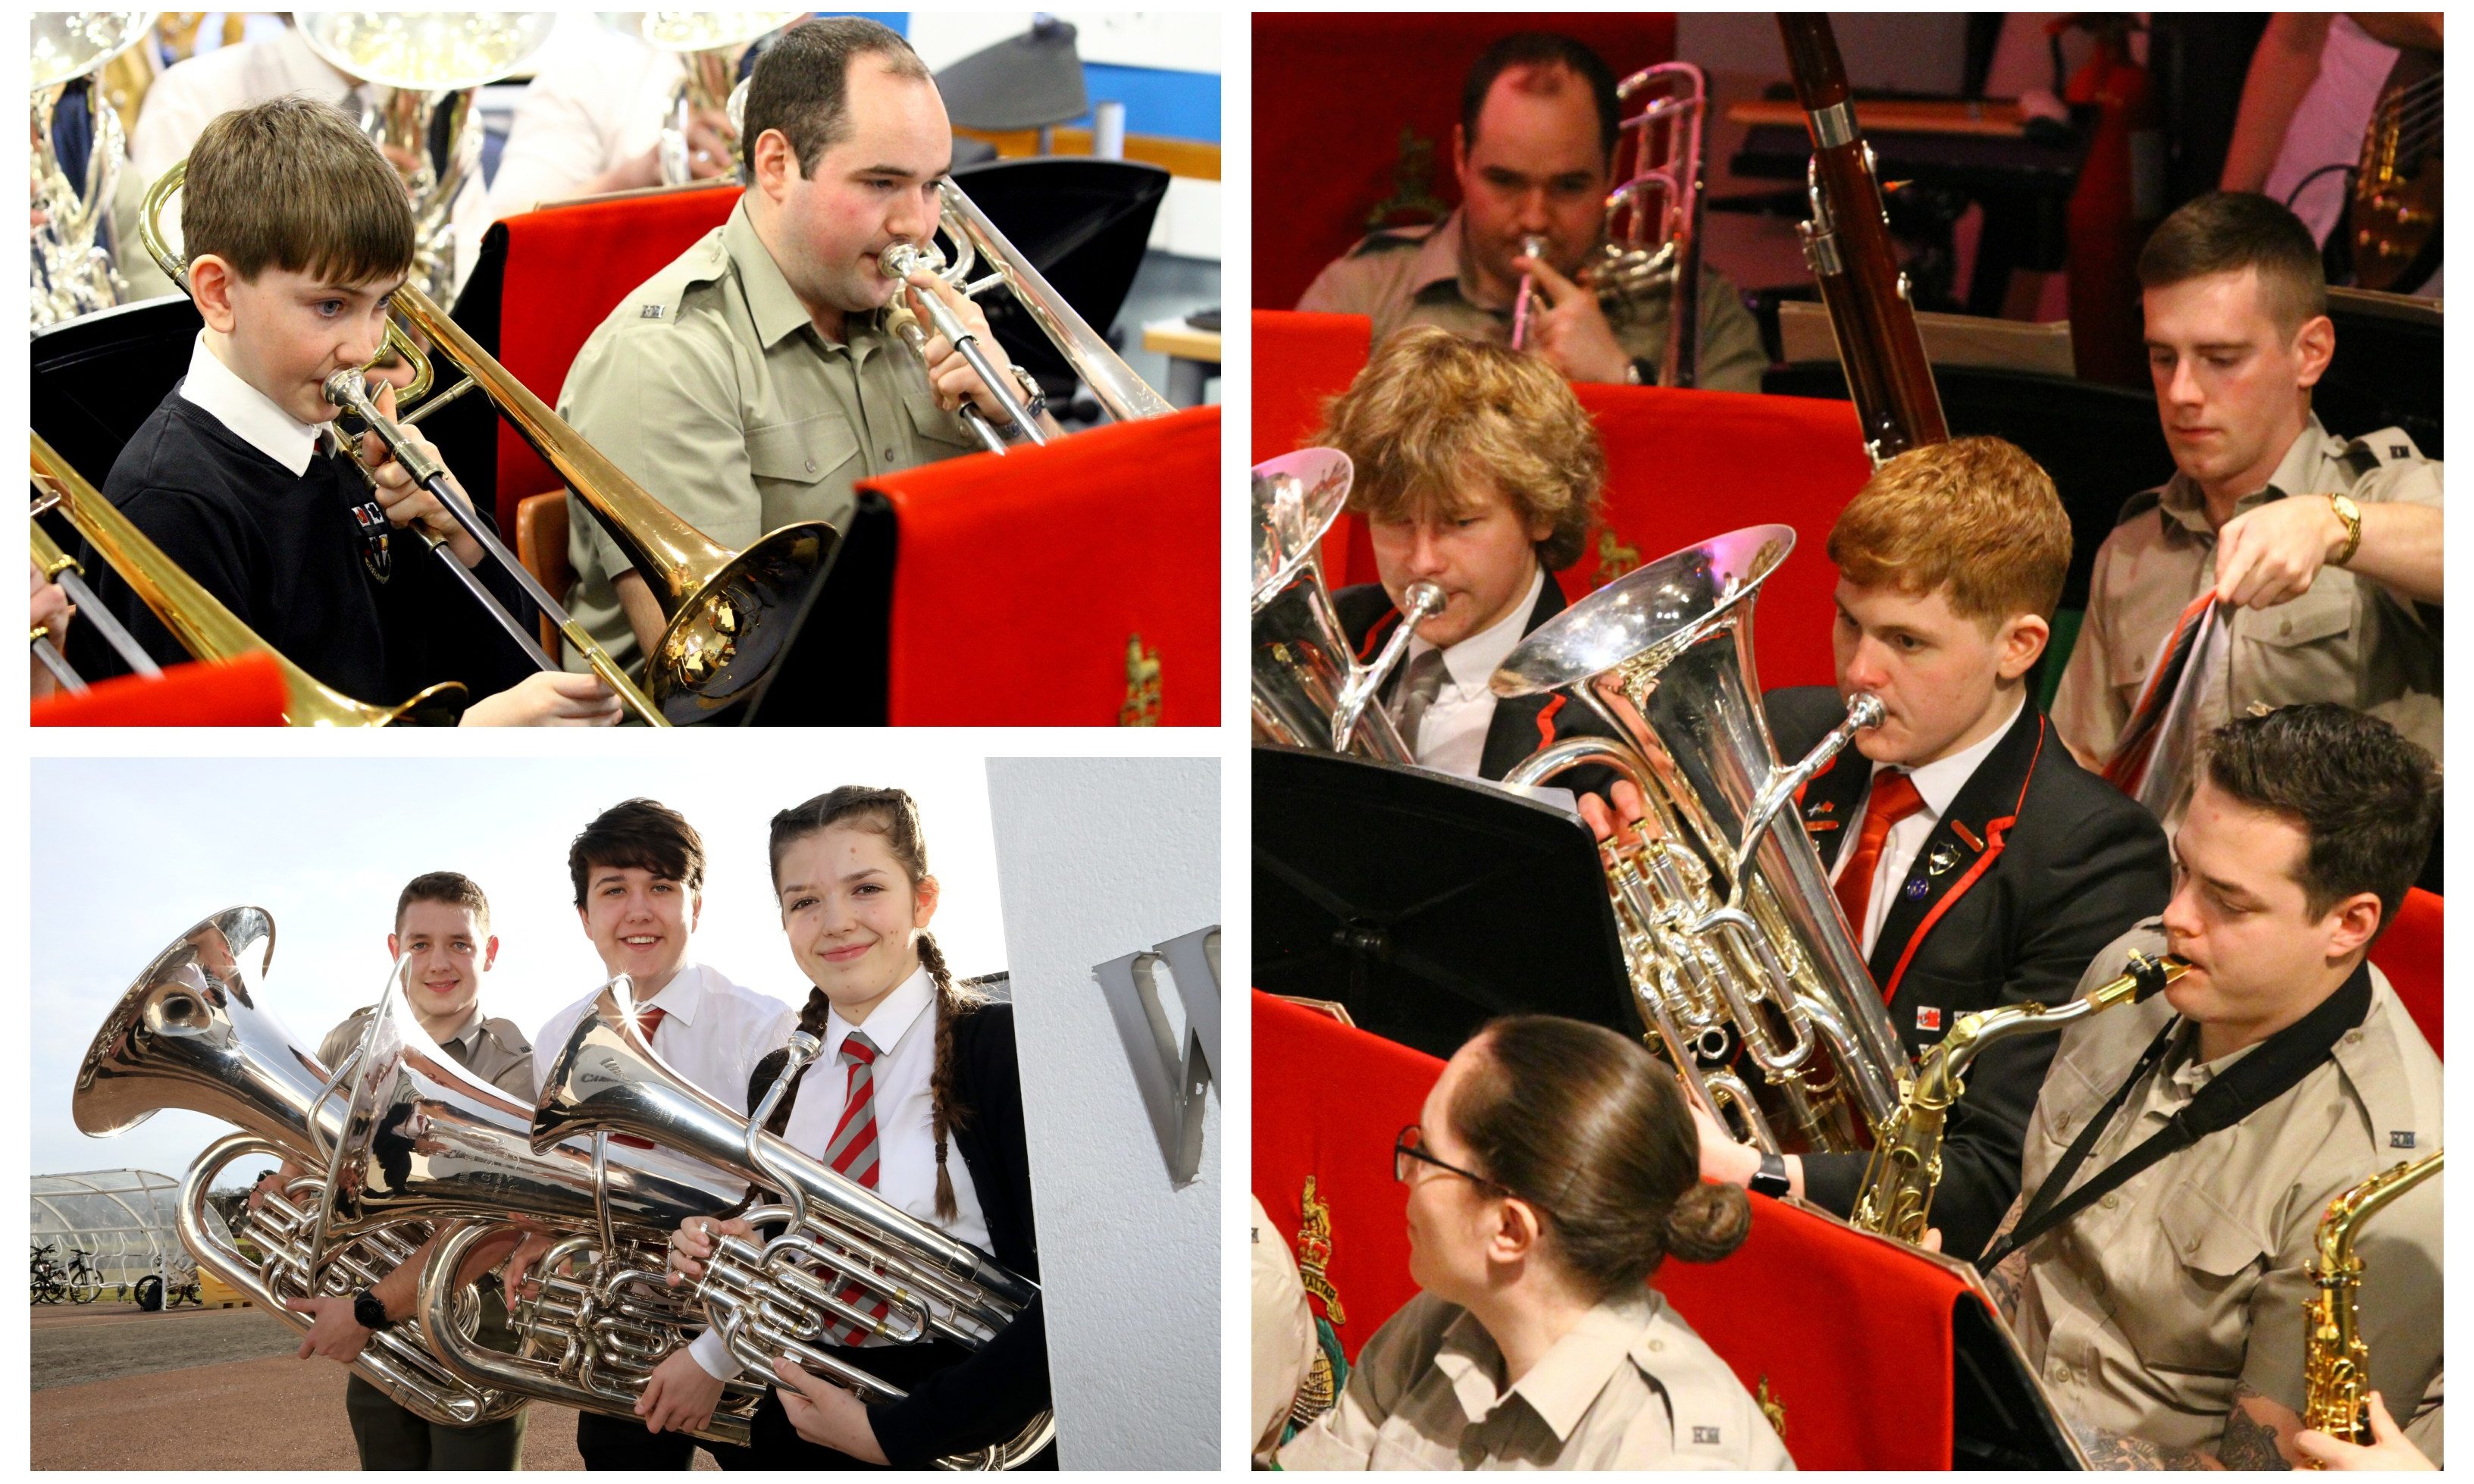 Pupils and musicians from the Royal Marines rehearsing at Carnoustie High.